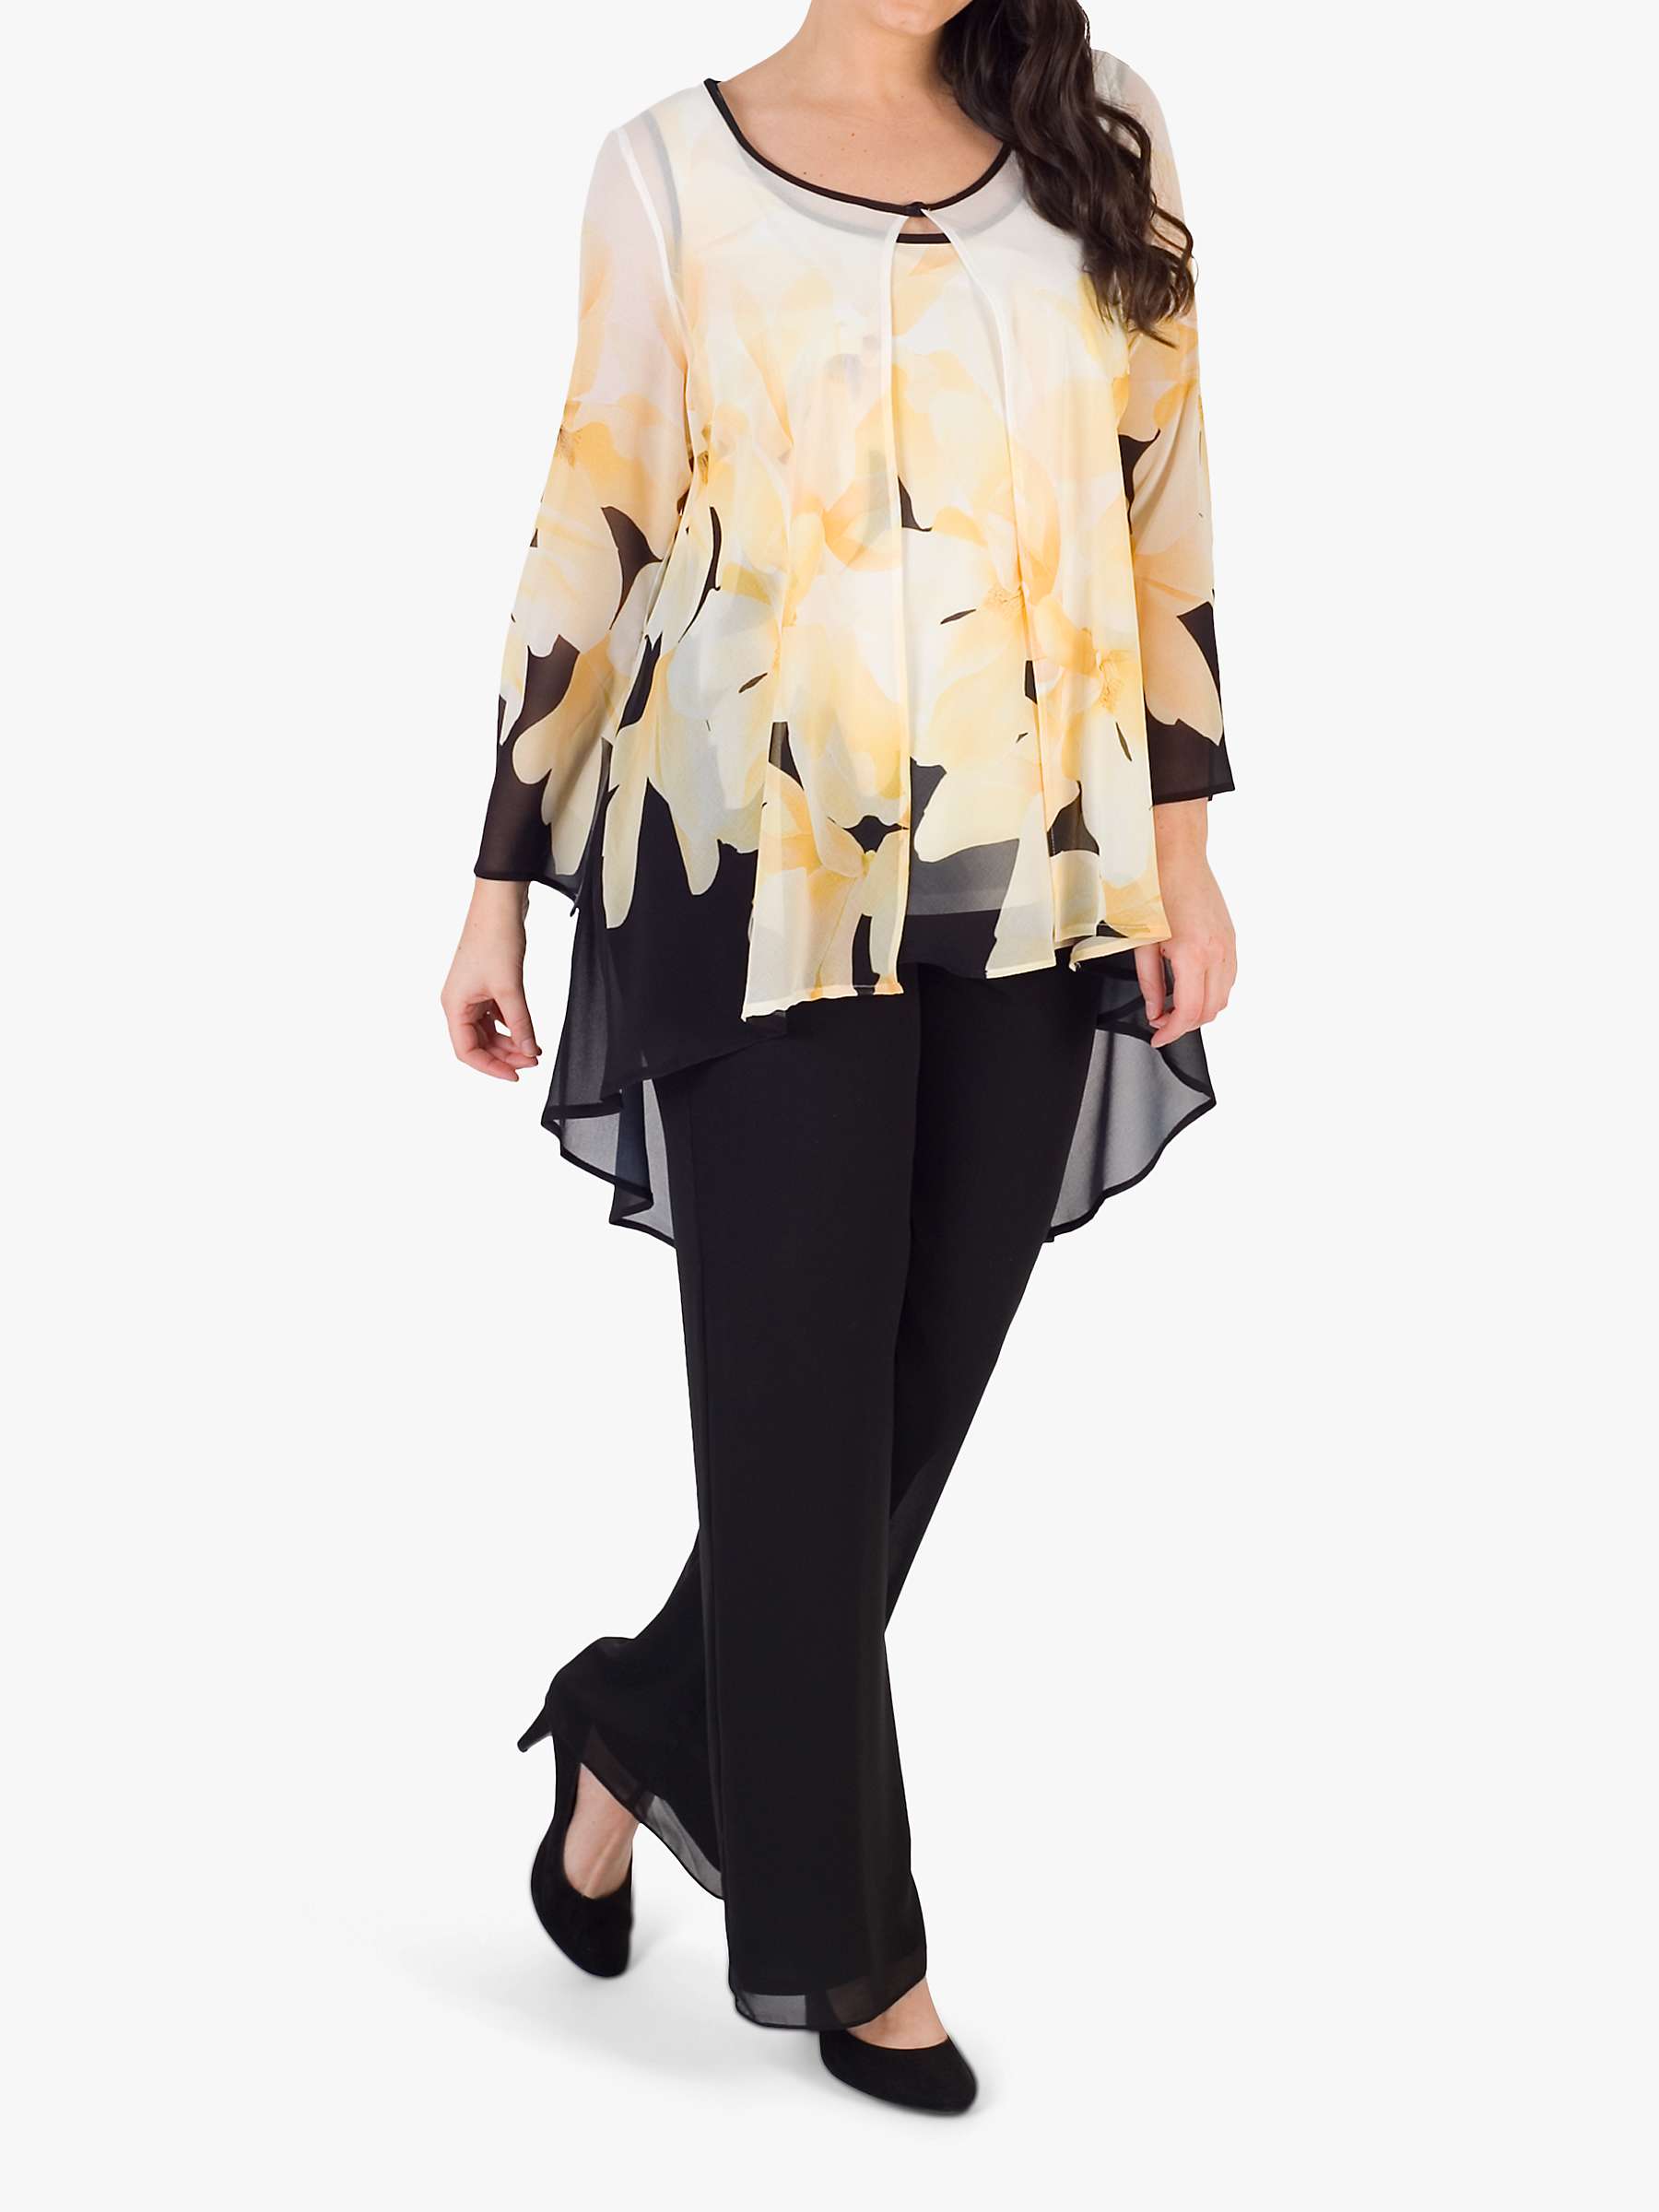 Buy chesca Semi-Sheer Floral Print Chiffon Jacket, Black/Yellow/Ivory Online at johnlewis.com